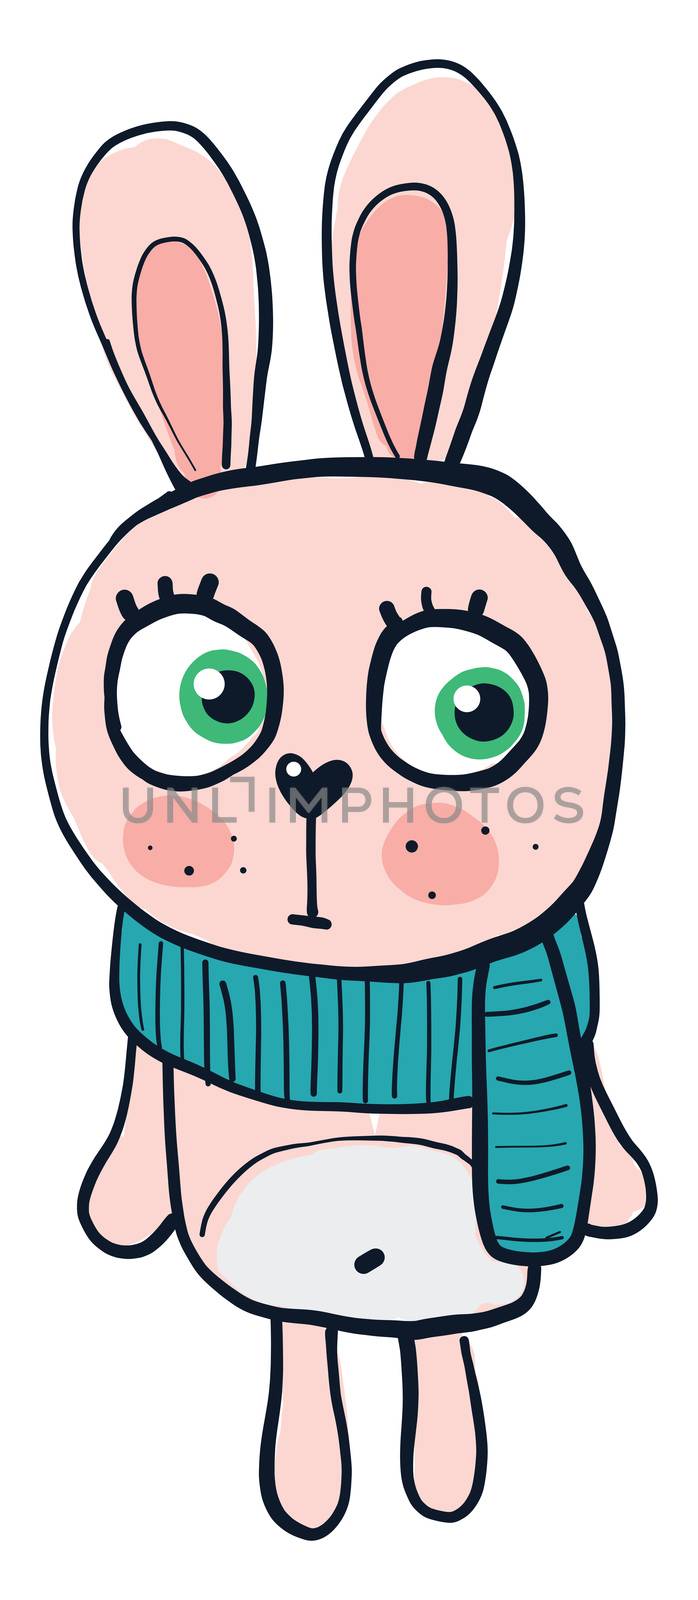 Scared bunny , illustration, vector on white background